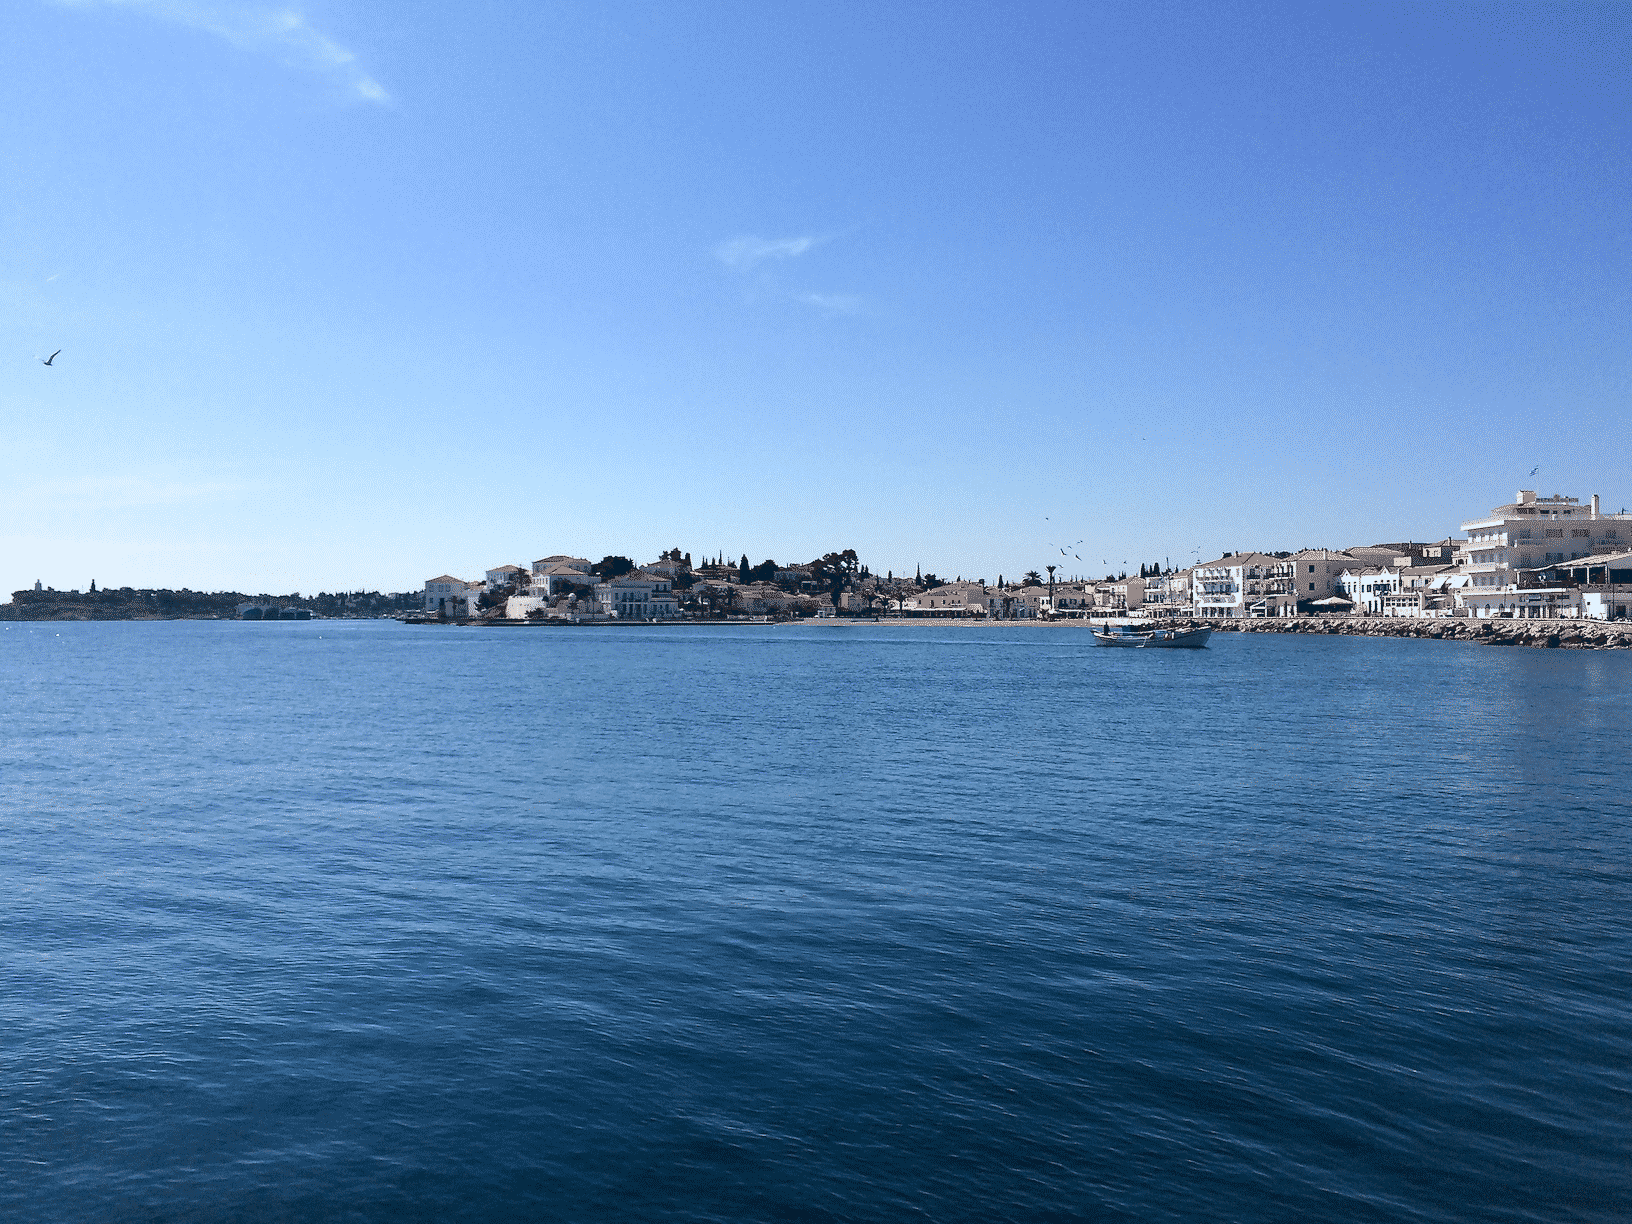 Arriving at Spetses island, Greece